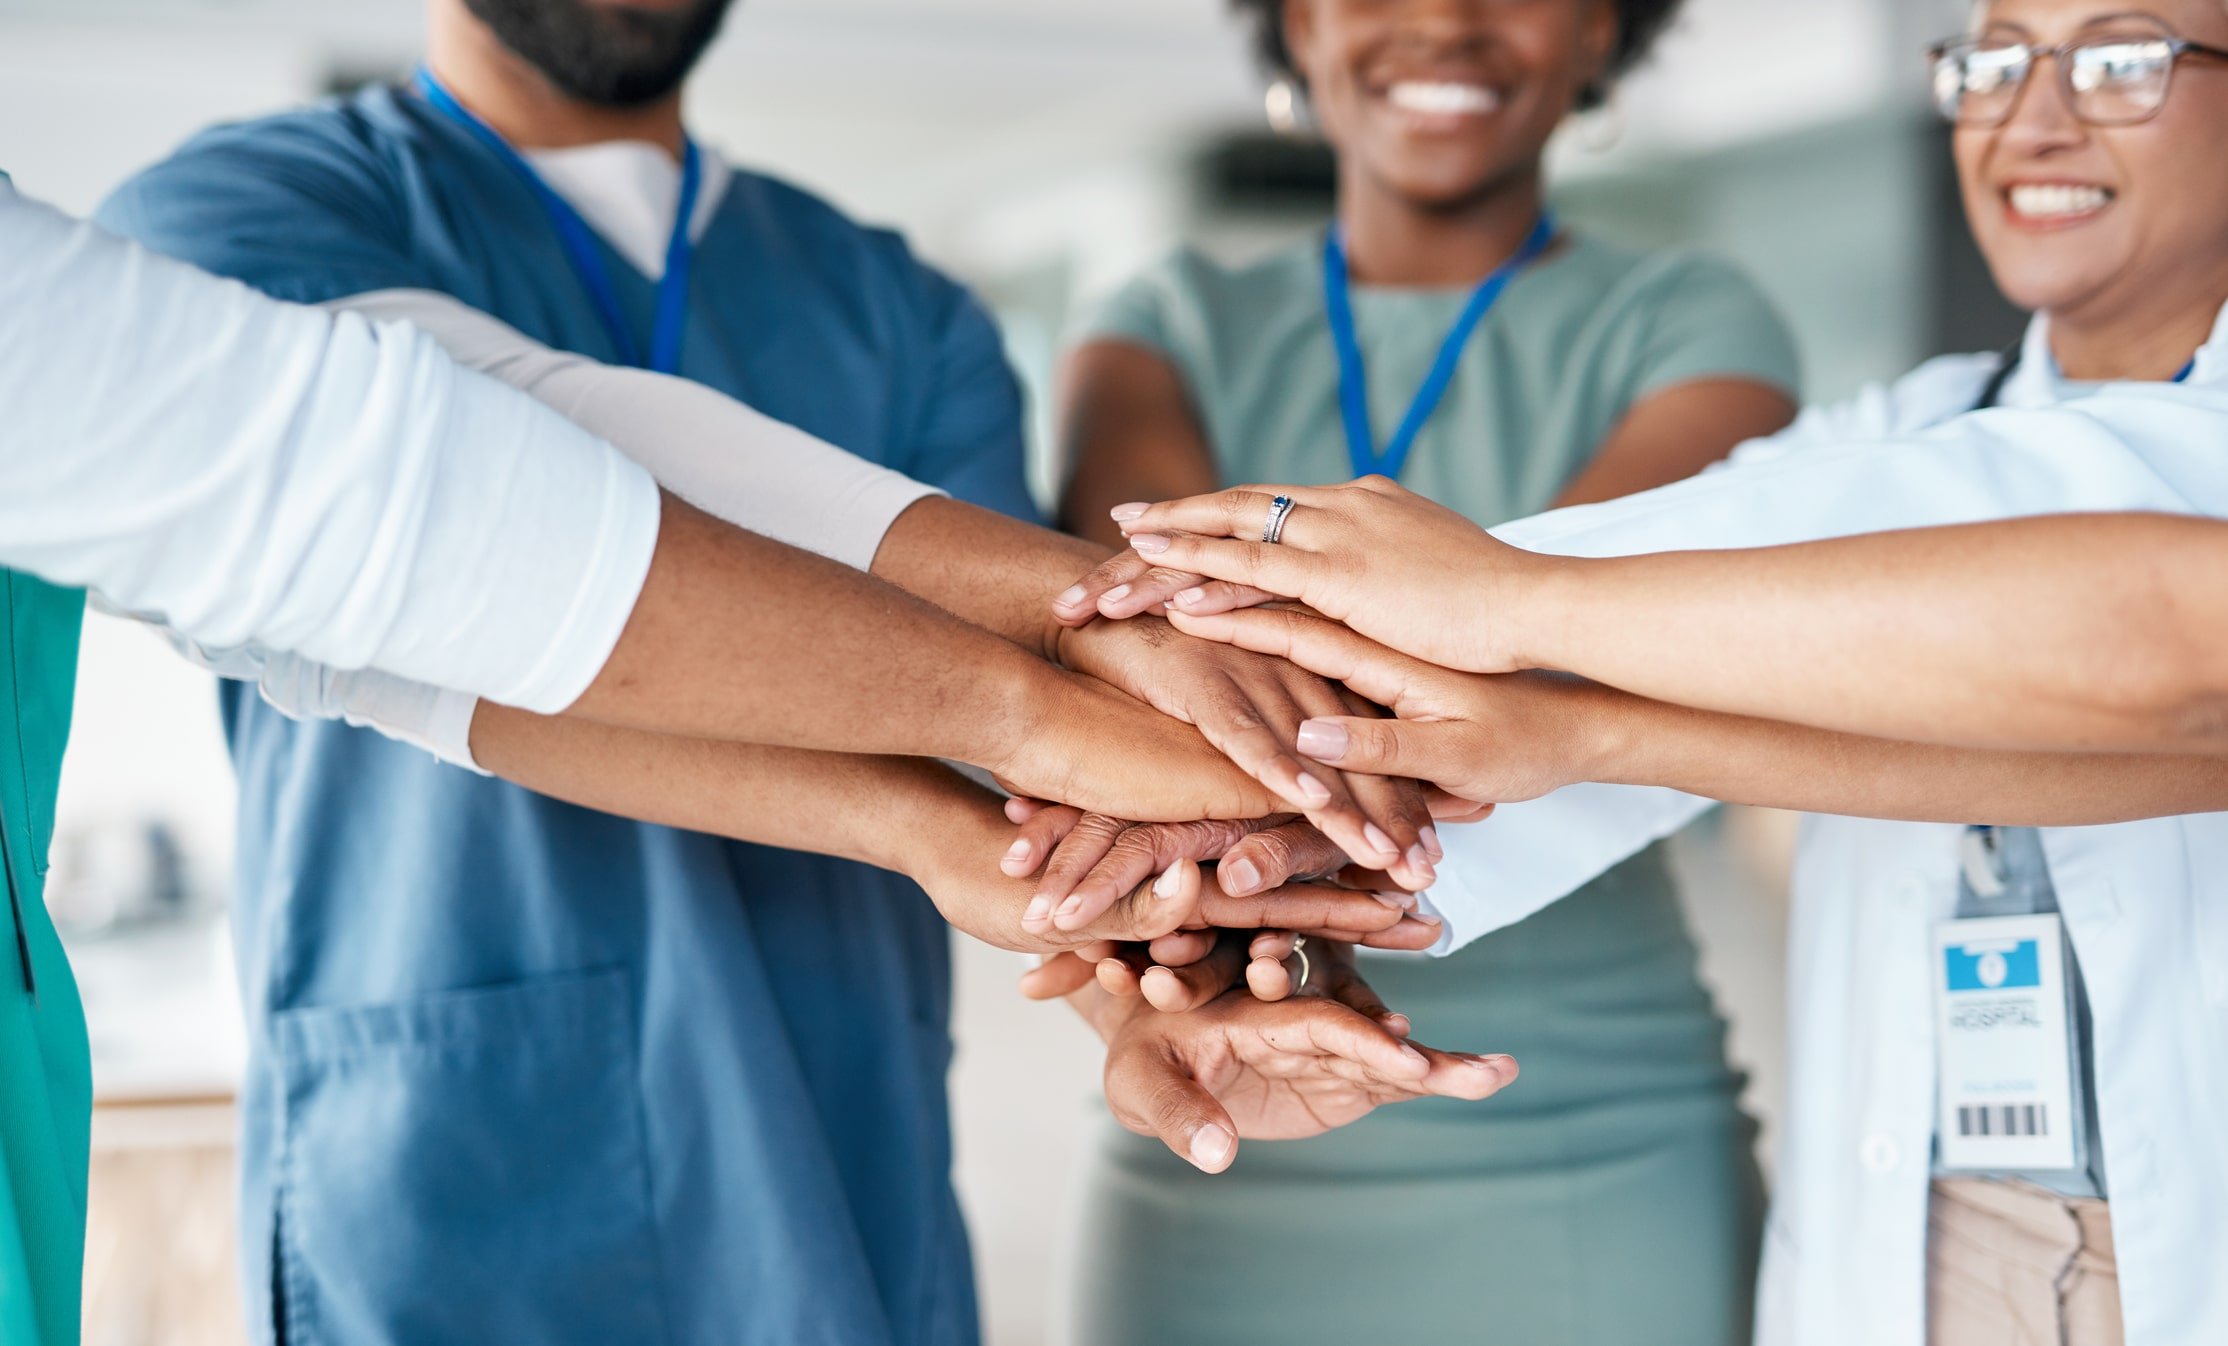 Value-based Care Solutions: Team-based Care Coordination